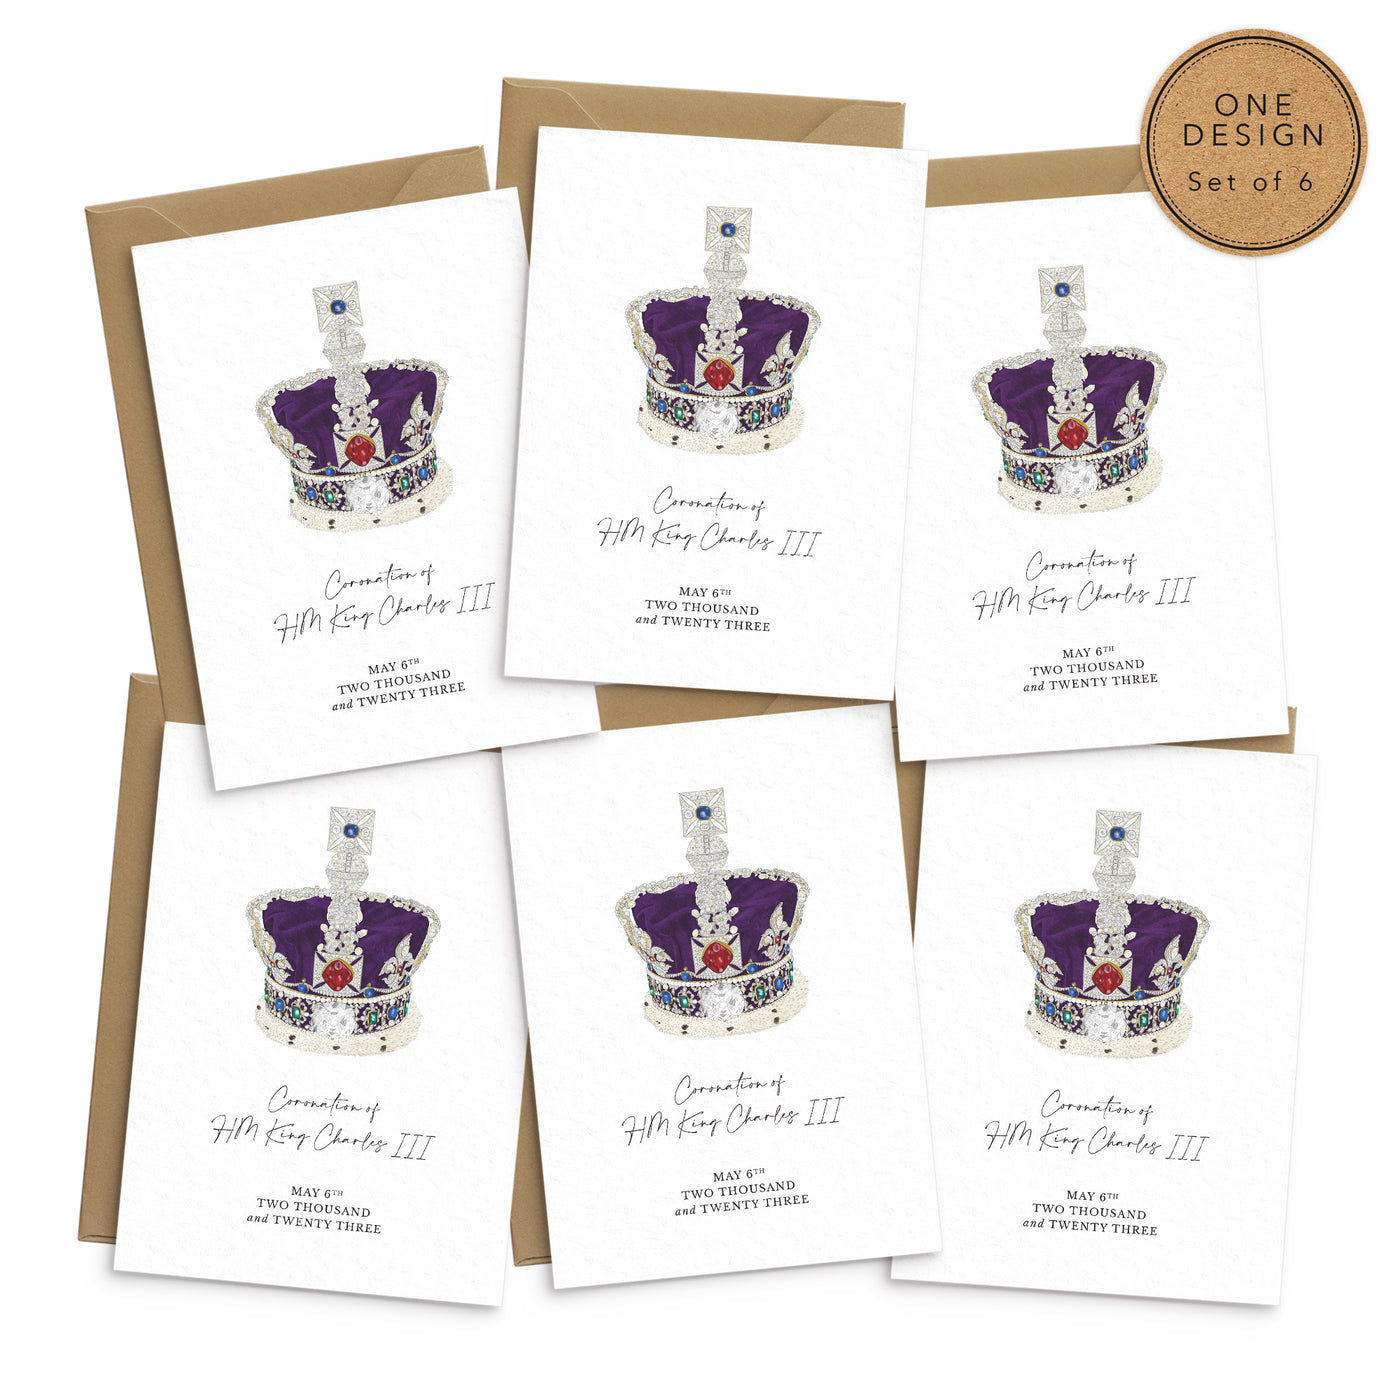 Coronation-of-King-Charles-III-Greetings-Card-Poppins-and-co